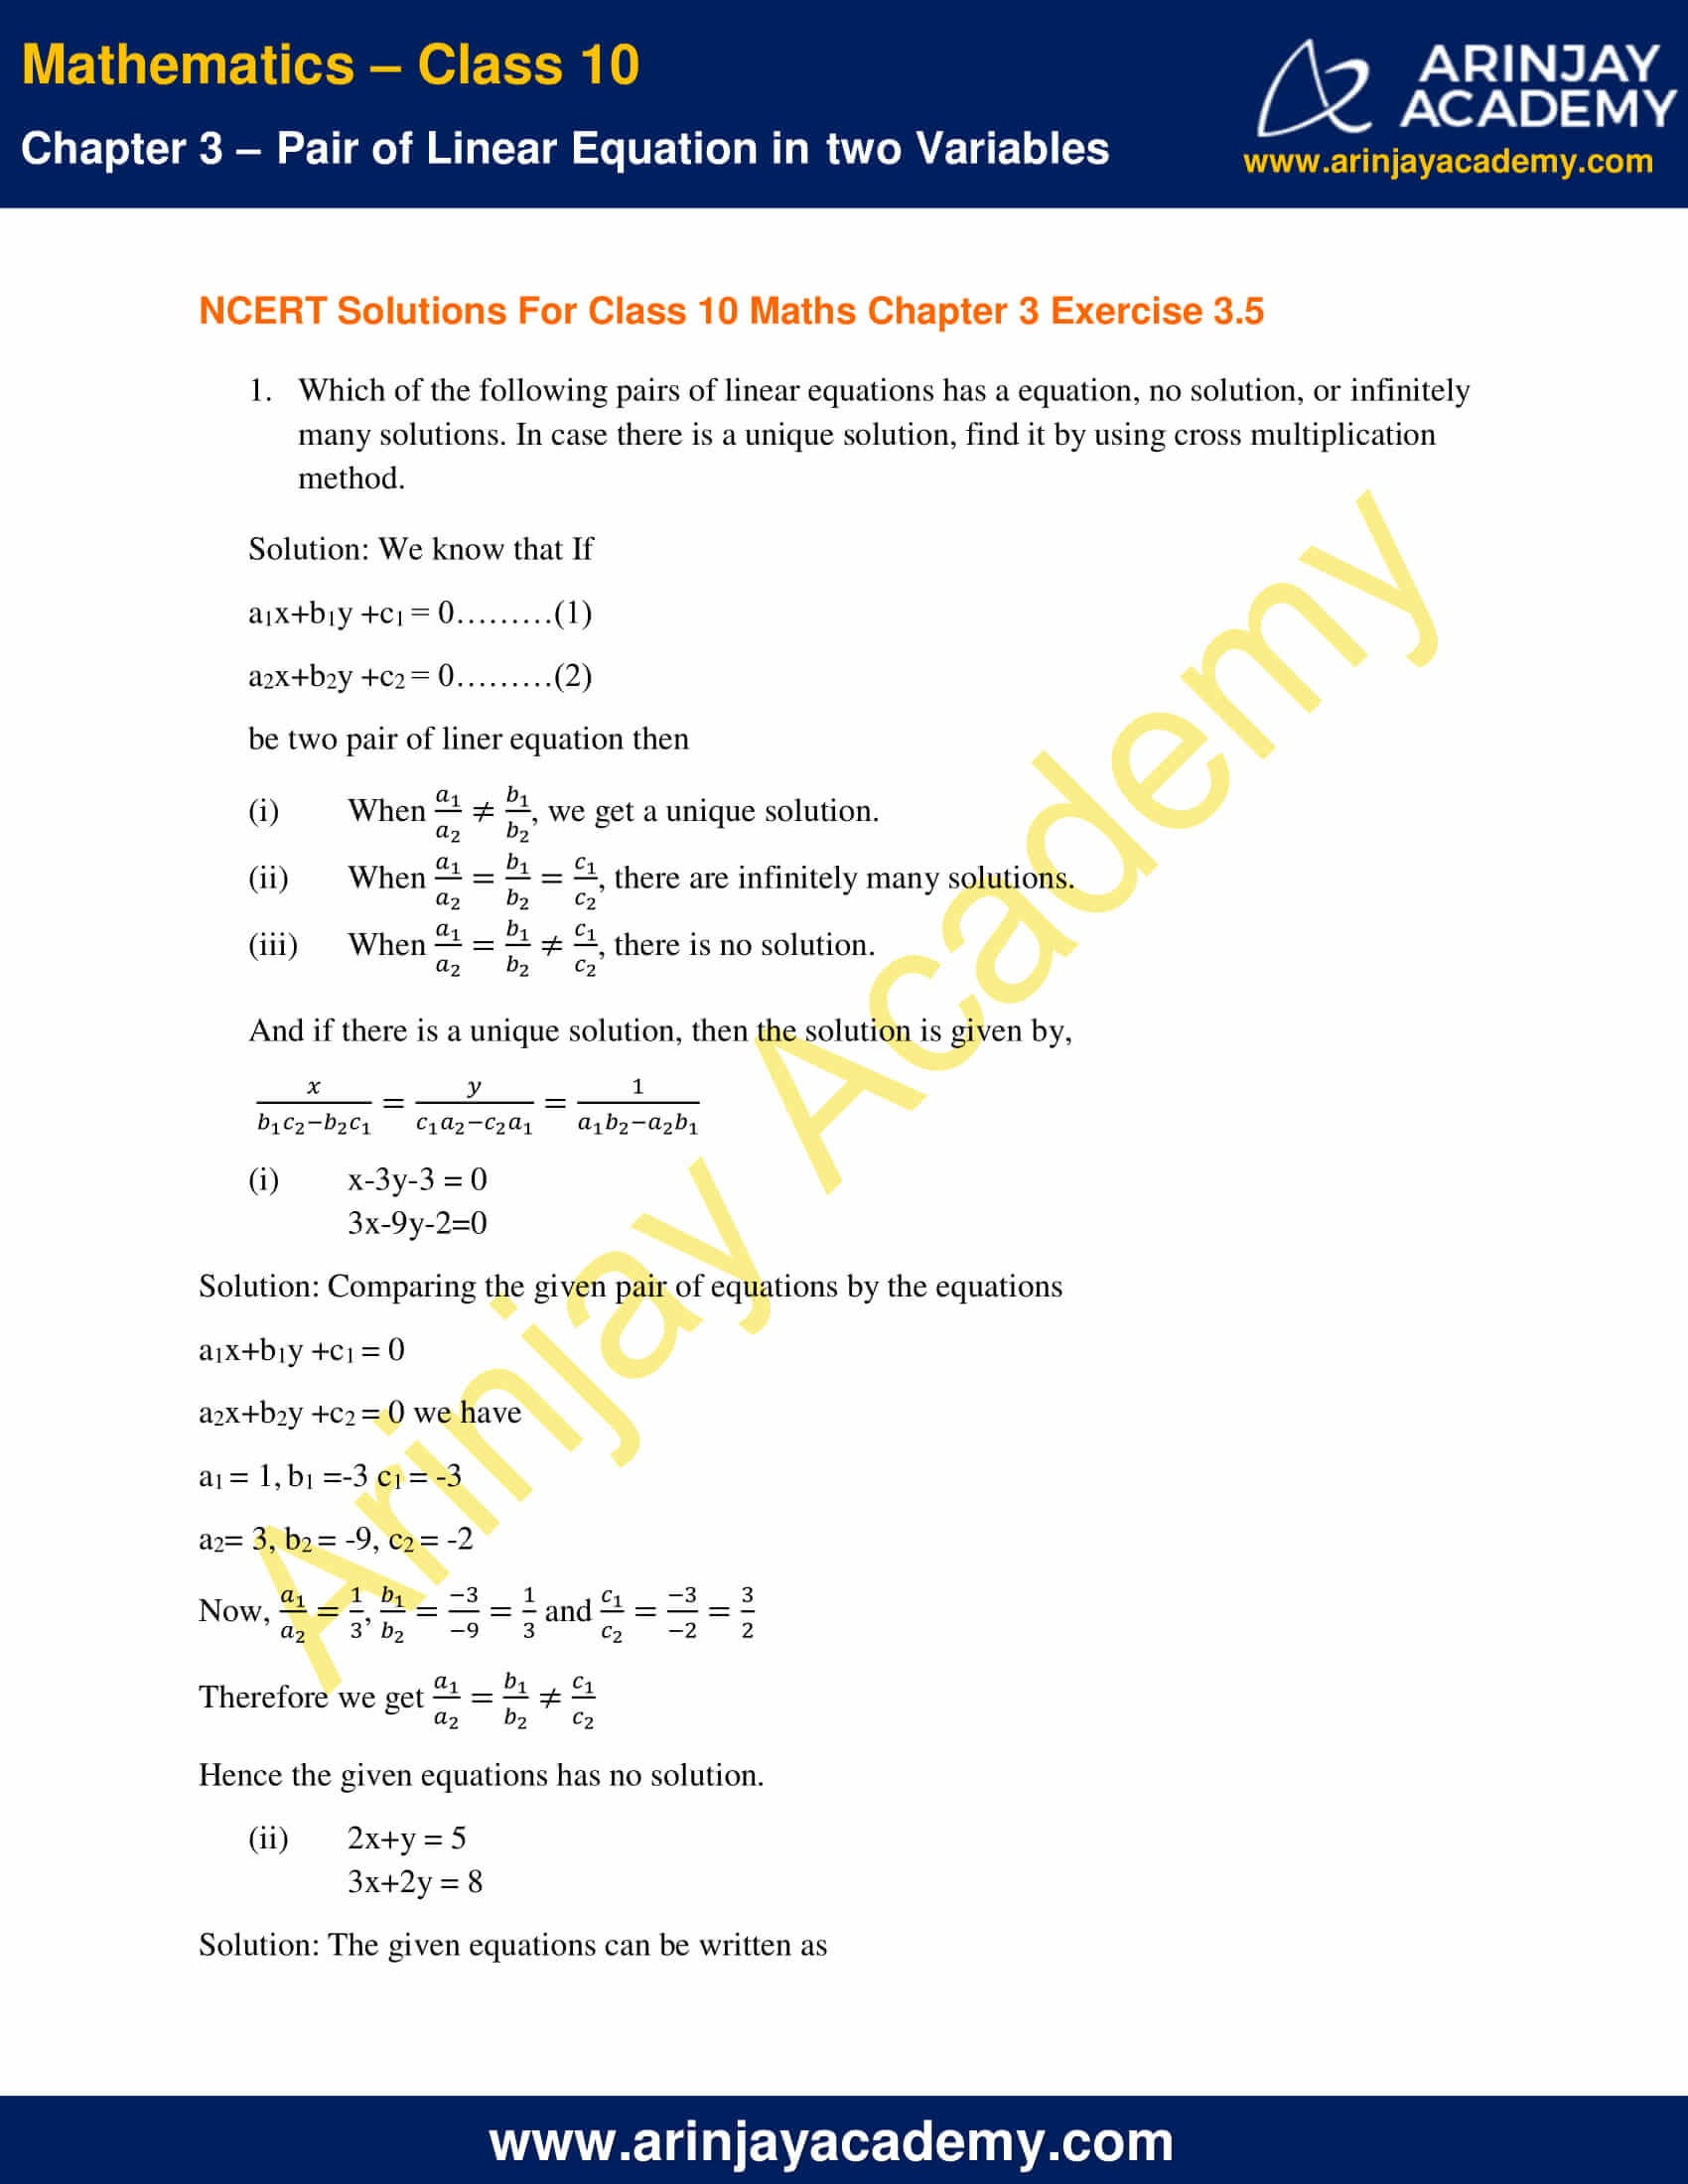 NCERT Solutions For Class 10 Maths Chapter 3 Exercise 3.5 image 1